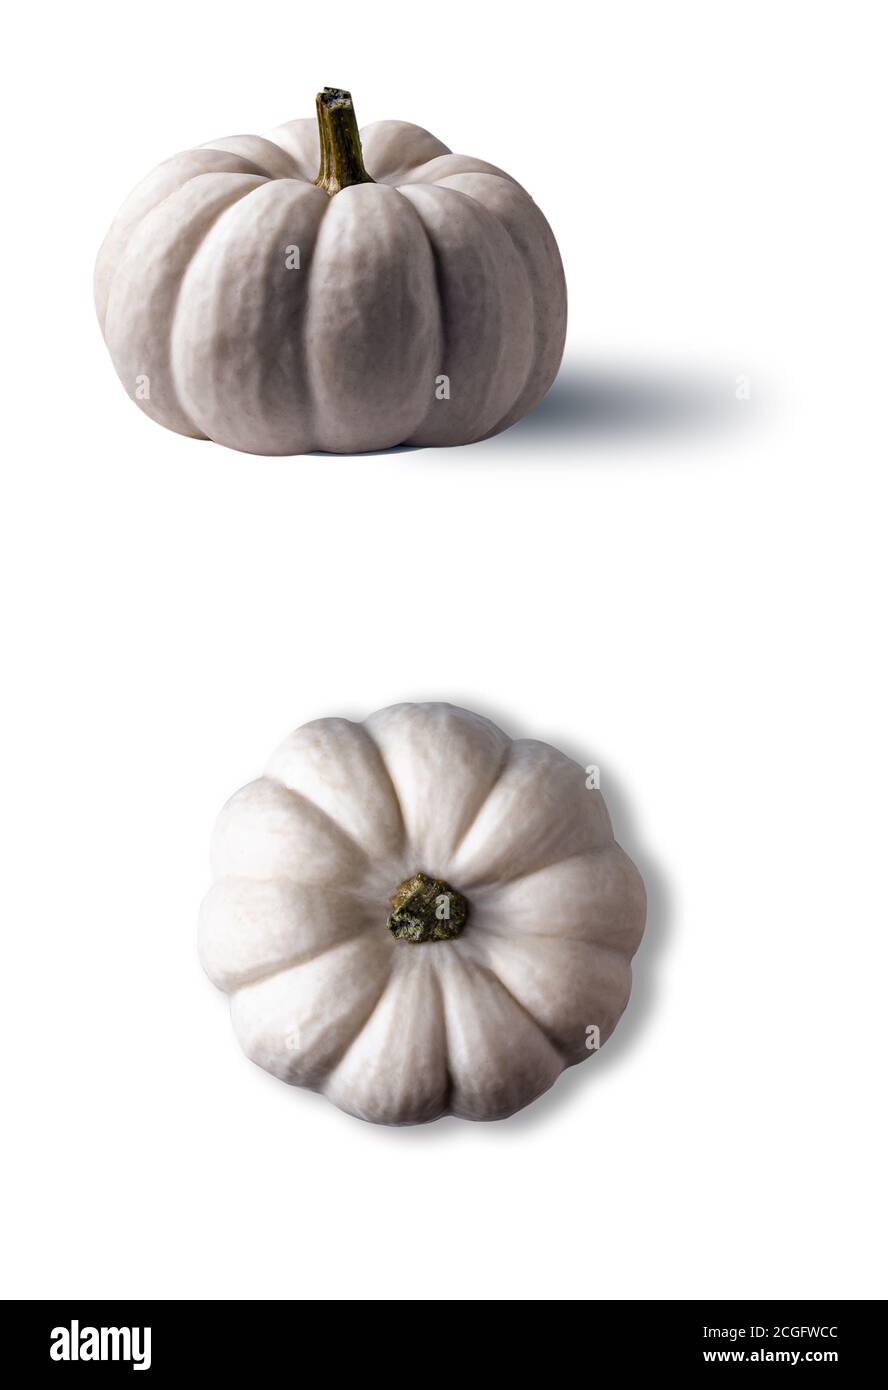 Whole white pumpkin with its shadow from above and side view isolated on white background. Vertical orientation. Copy space. Stock Photo